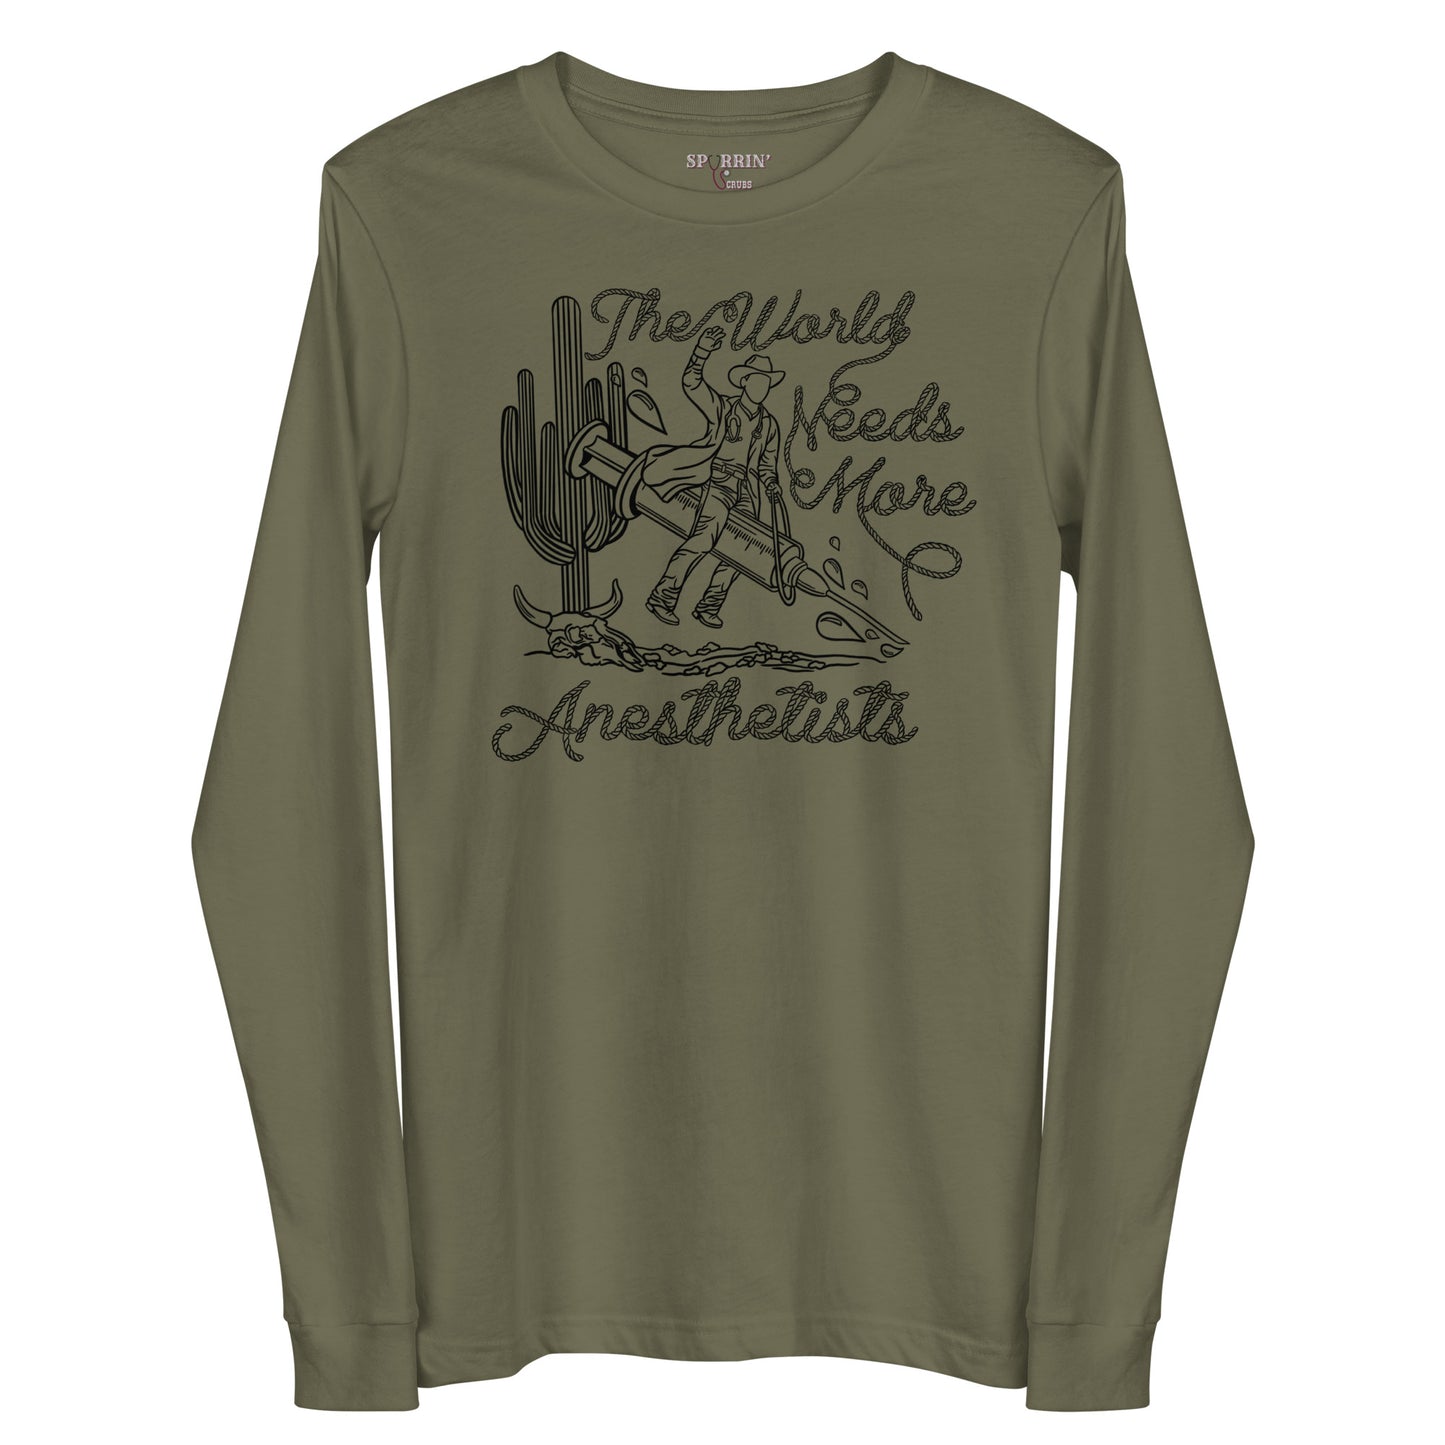 TWNM- Anesthetists Long Sleeve T-Shirt Light Colors